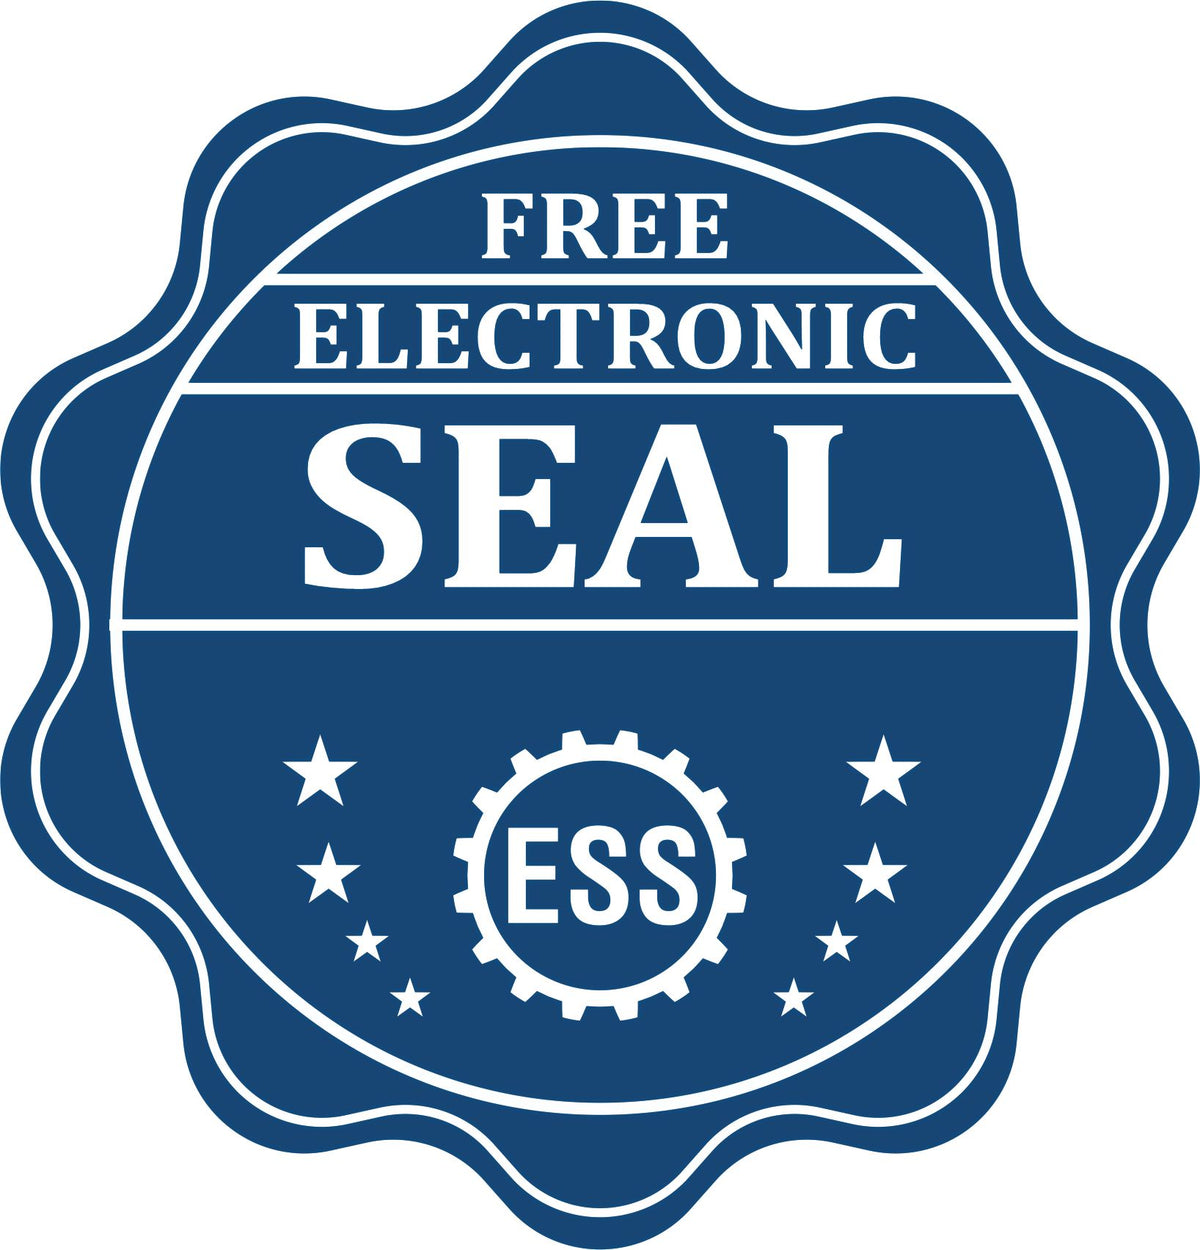 A badge showing a free electronic seal for the Hybrid Utah Architect Seal with stars and the ESS gear on the emblem.